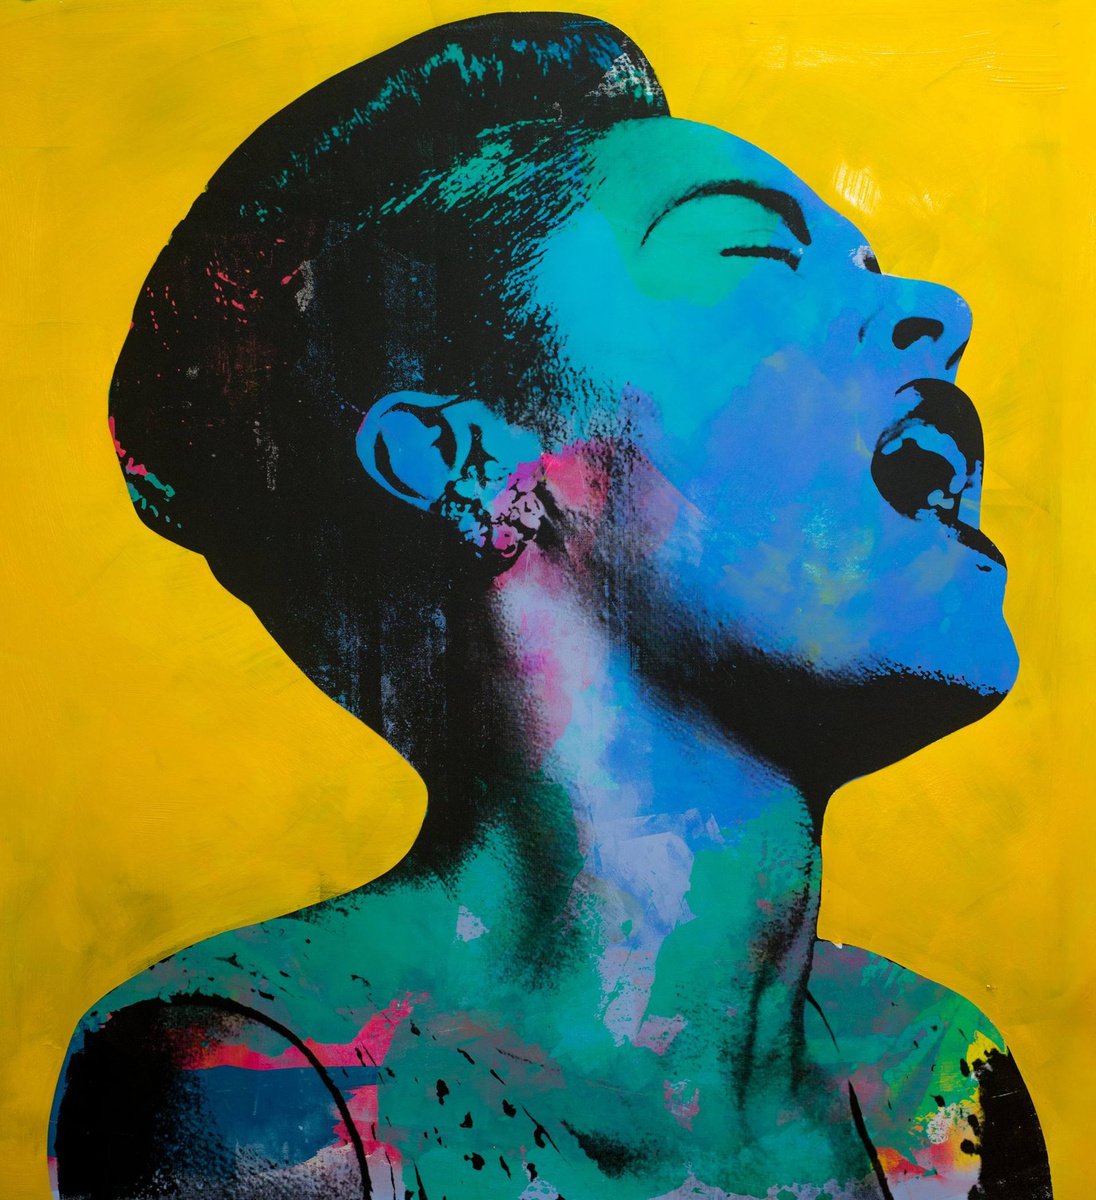 Lady Day - Billie Holiday by Dane Shue